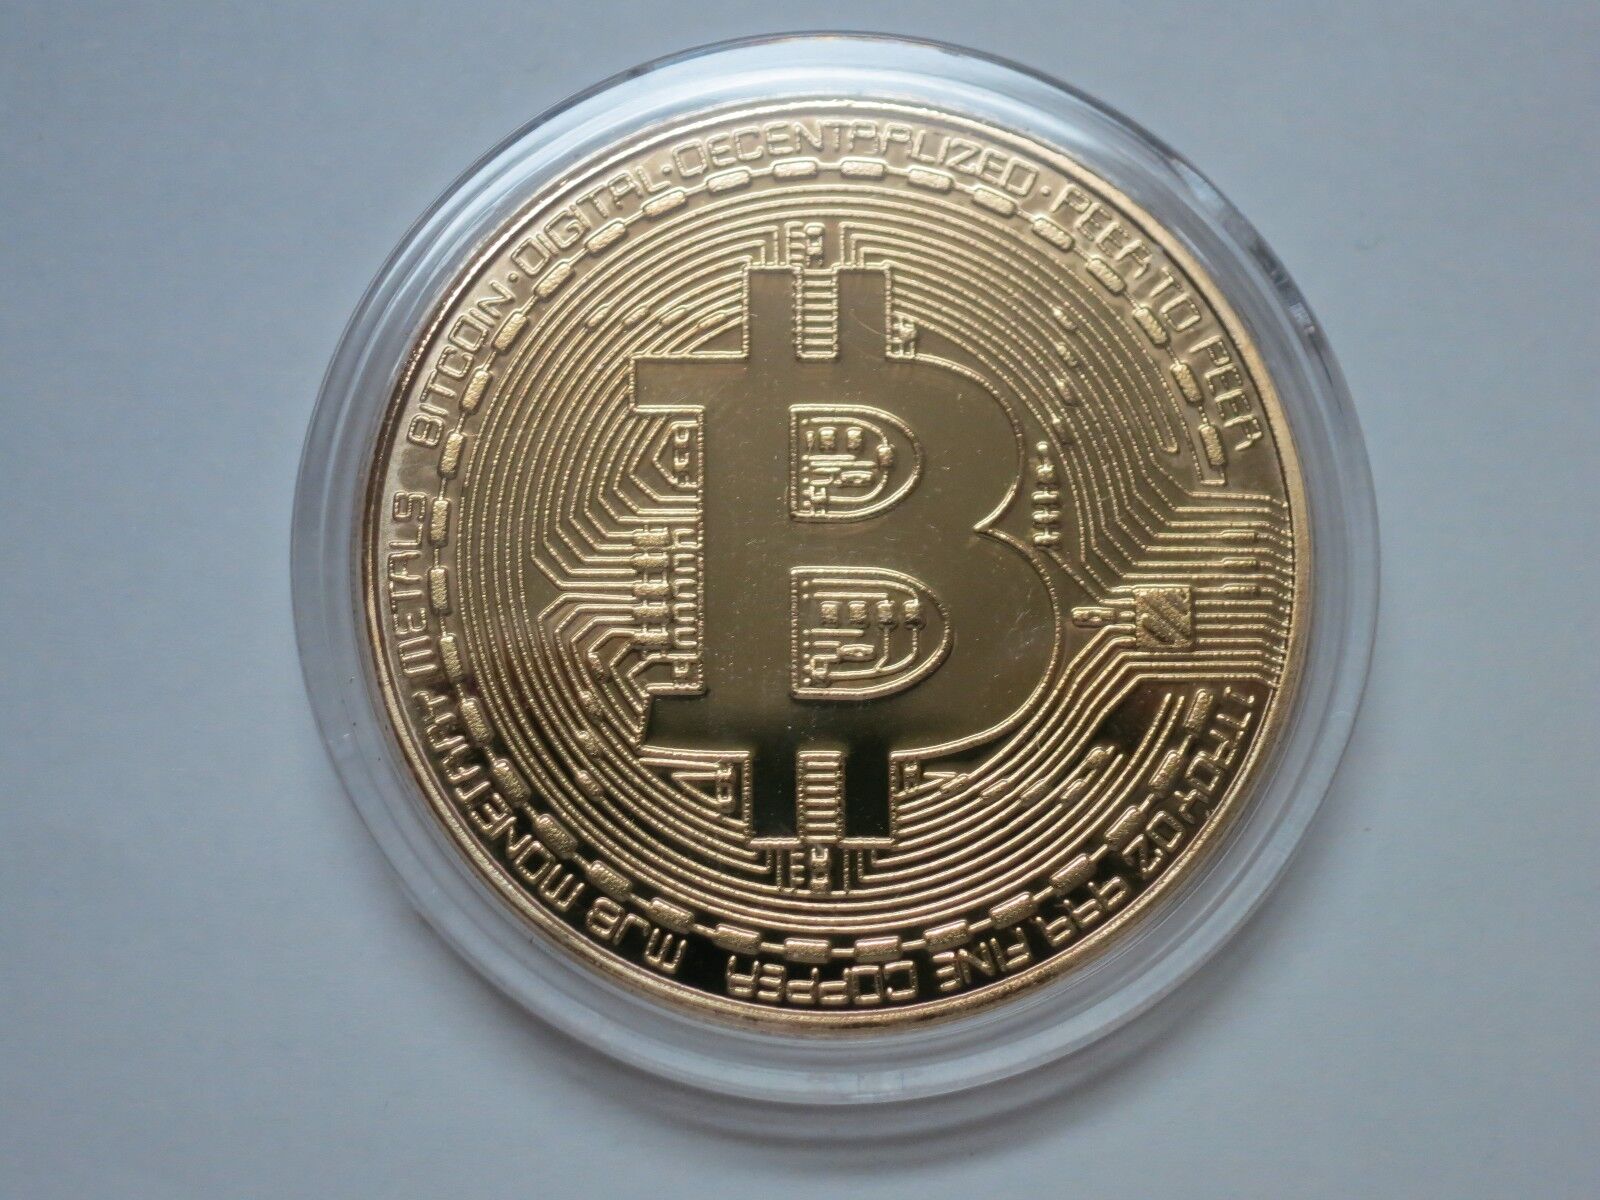 Rare Physical Bitcoin Auctioned on eBay for Almost $ - Coindoo